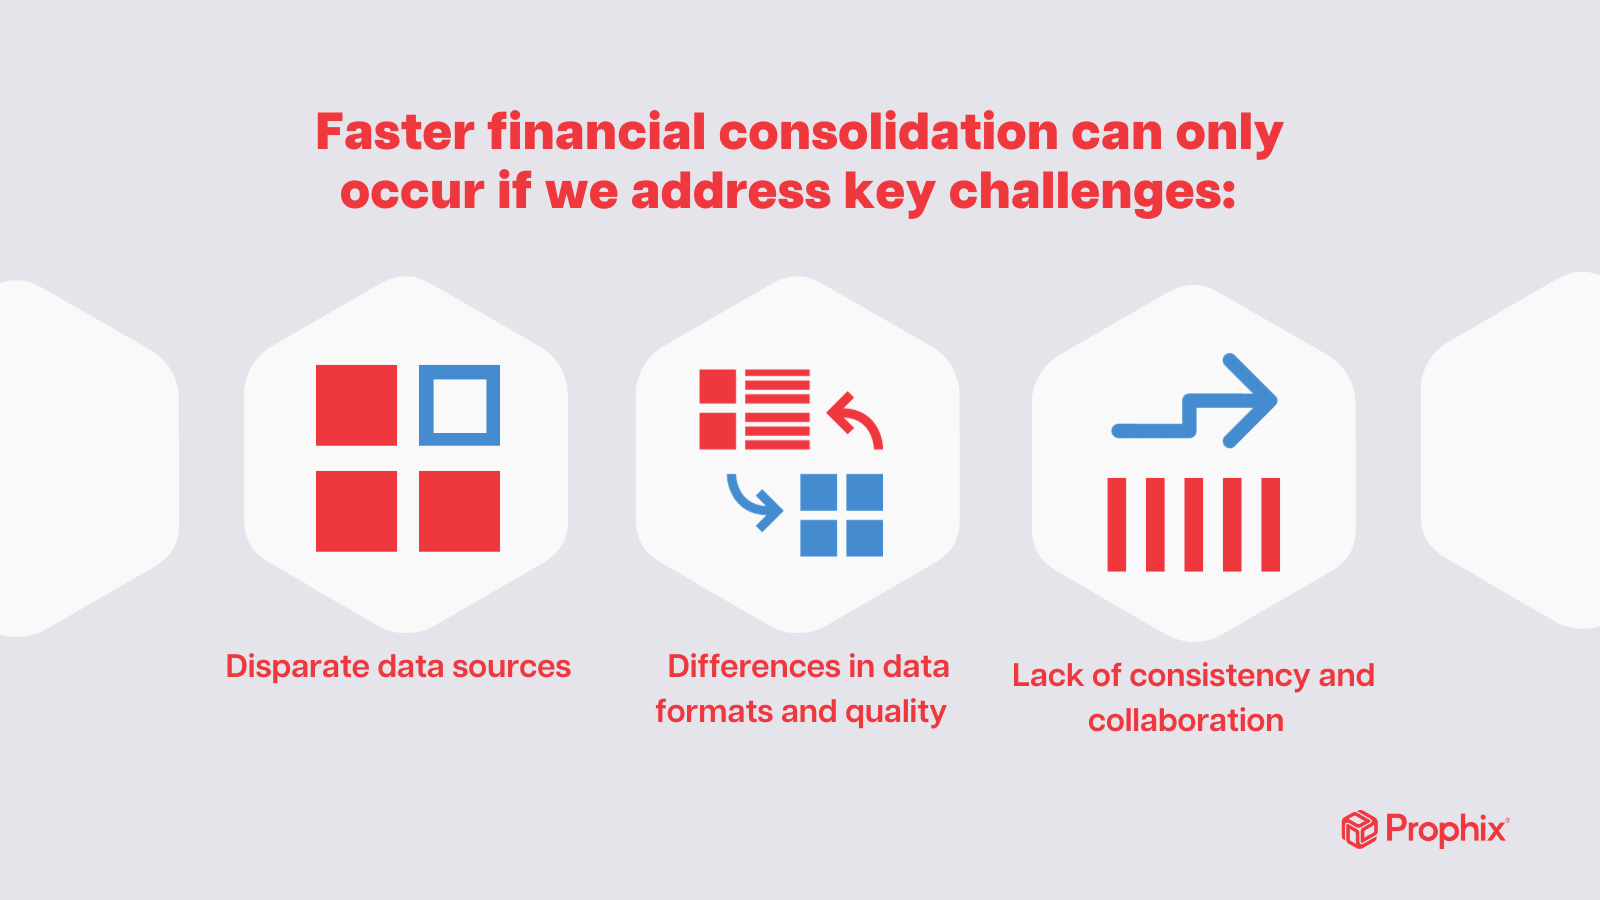 Faster financial consolidation can only occur if we address key challenges: